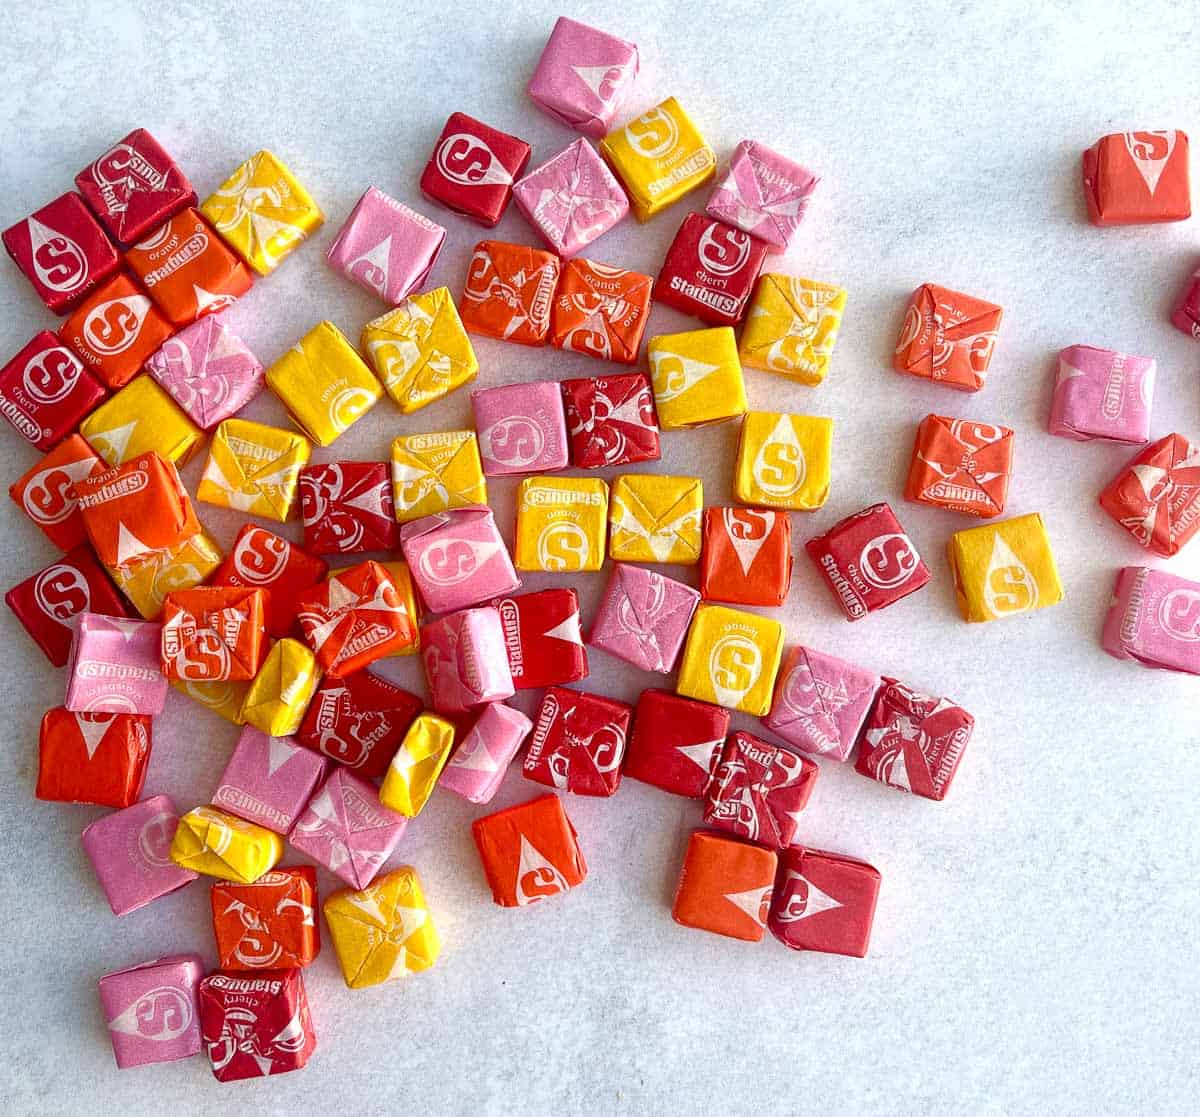 Starbursts scattered across a countertop